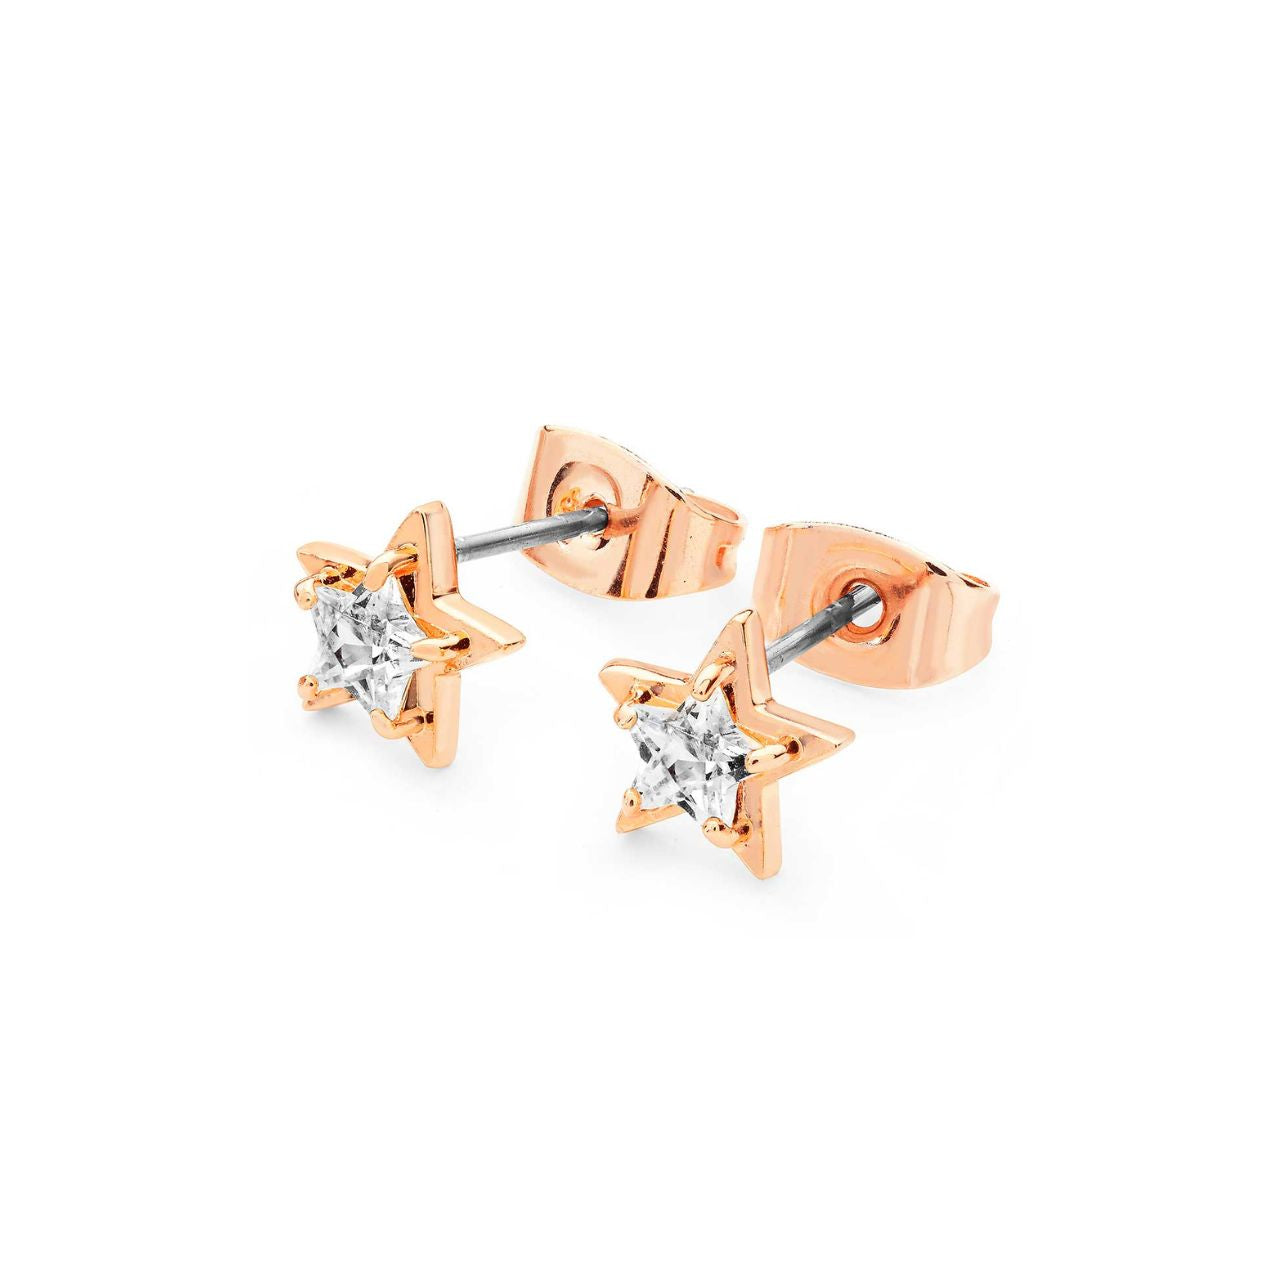 Star Clear CZ Stud Rose Gold Earrings by Tipperary  Crafted in rose gold these earrings can be worn everyday to add a touch of sparkle to any outfit. They secure comfortably with pushbacks.